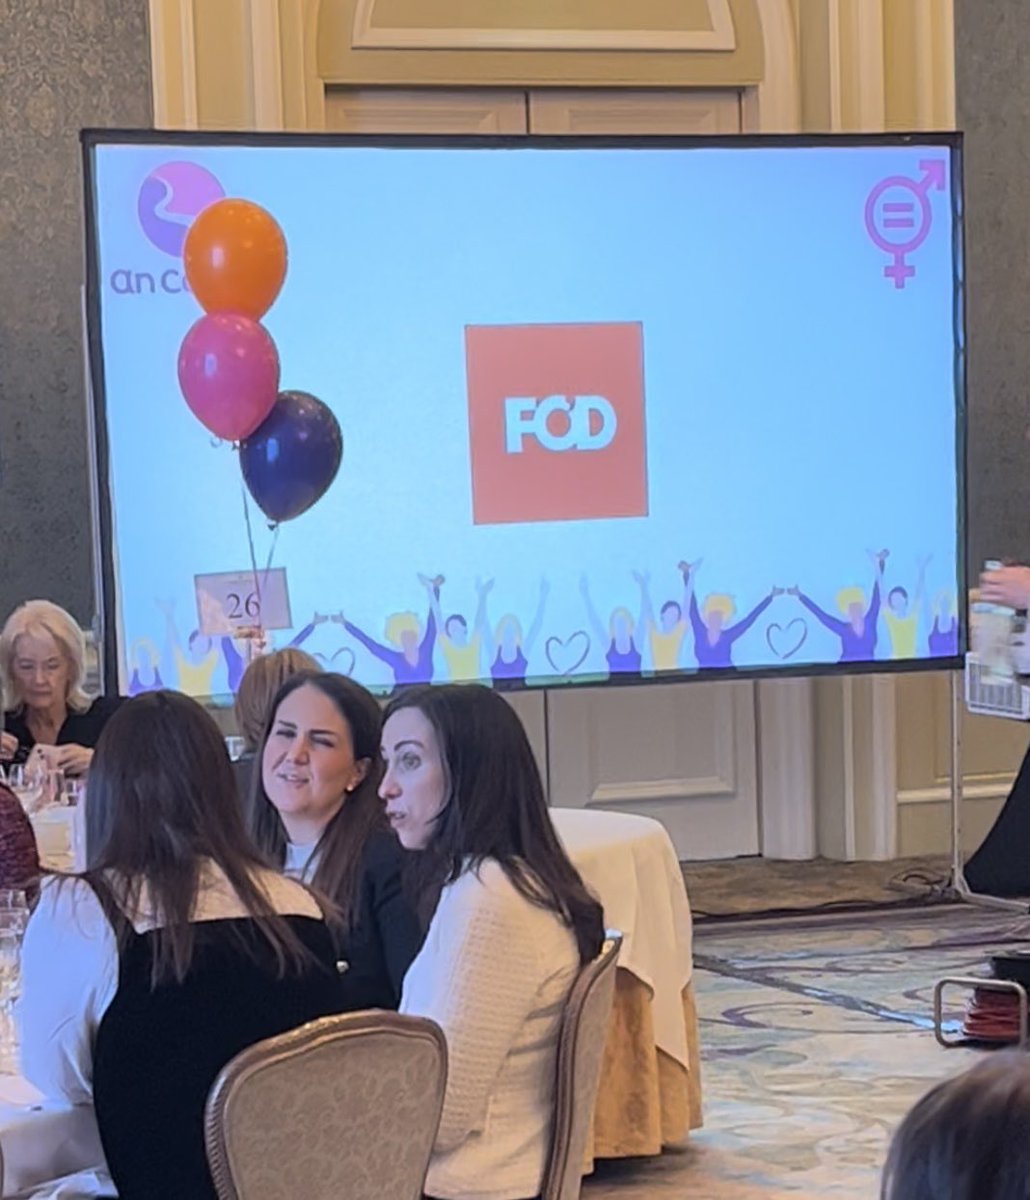 Delighted to host a table at the @an_cosan IWD lunch today. Such a worthy cause! #OneGenerationSolution #IWD2023 #DigitalInclusion #GenderEquality #CommunityEducation #fod @acd129 @HeydiFoster